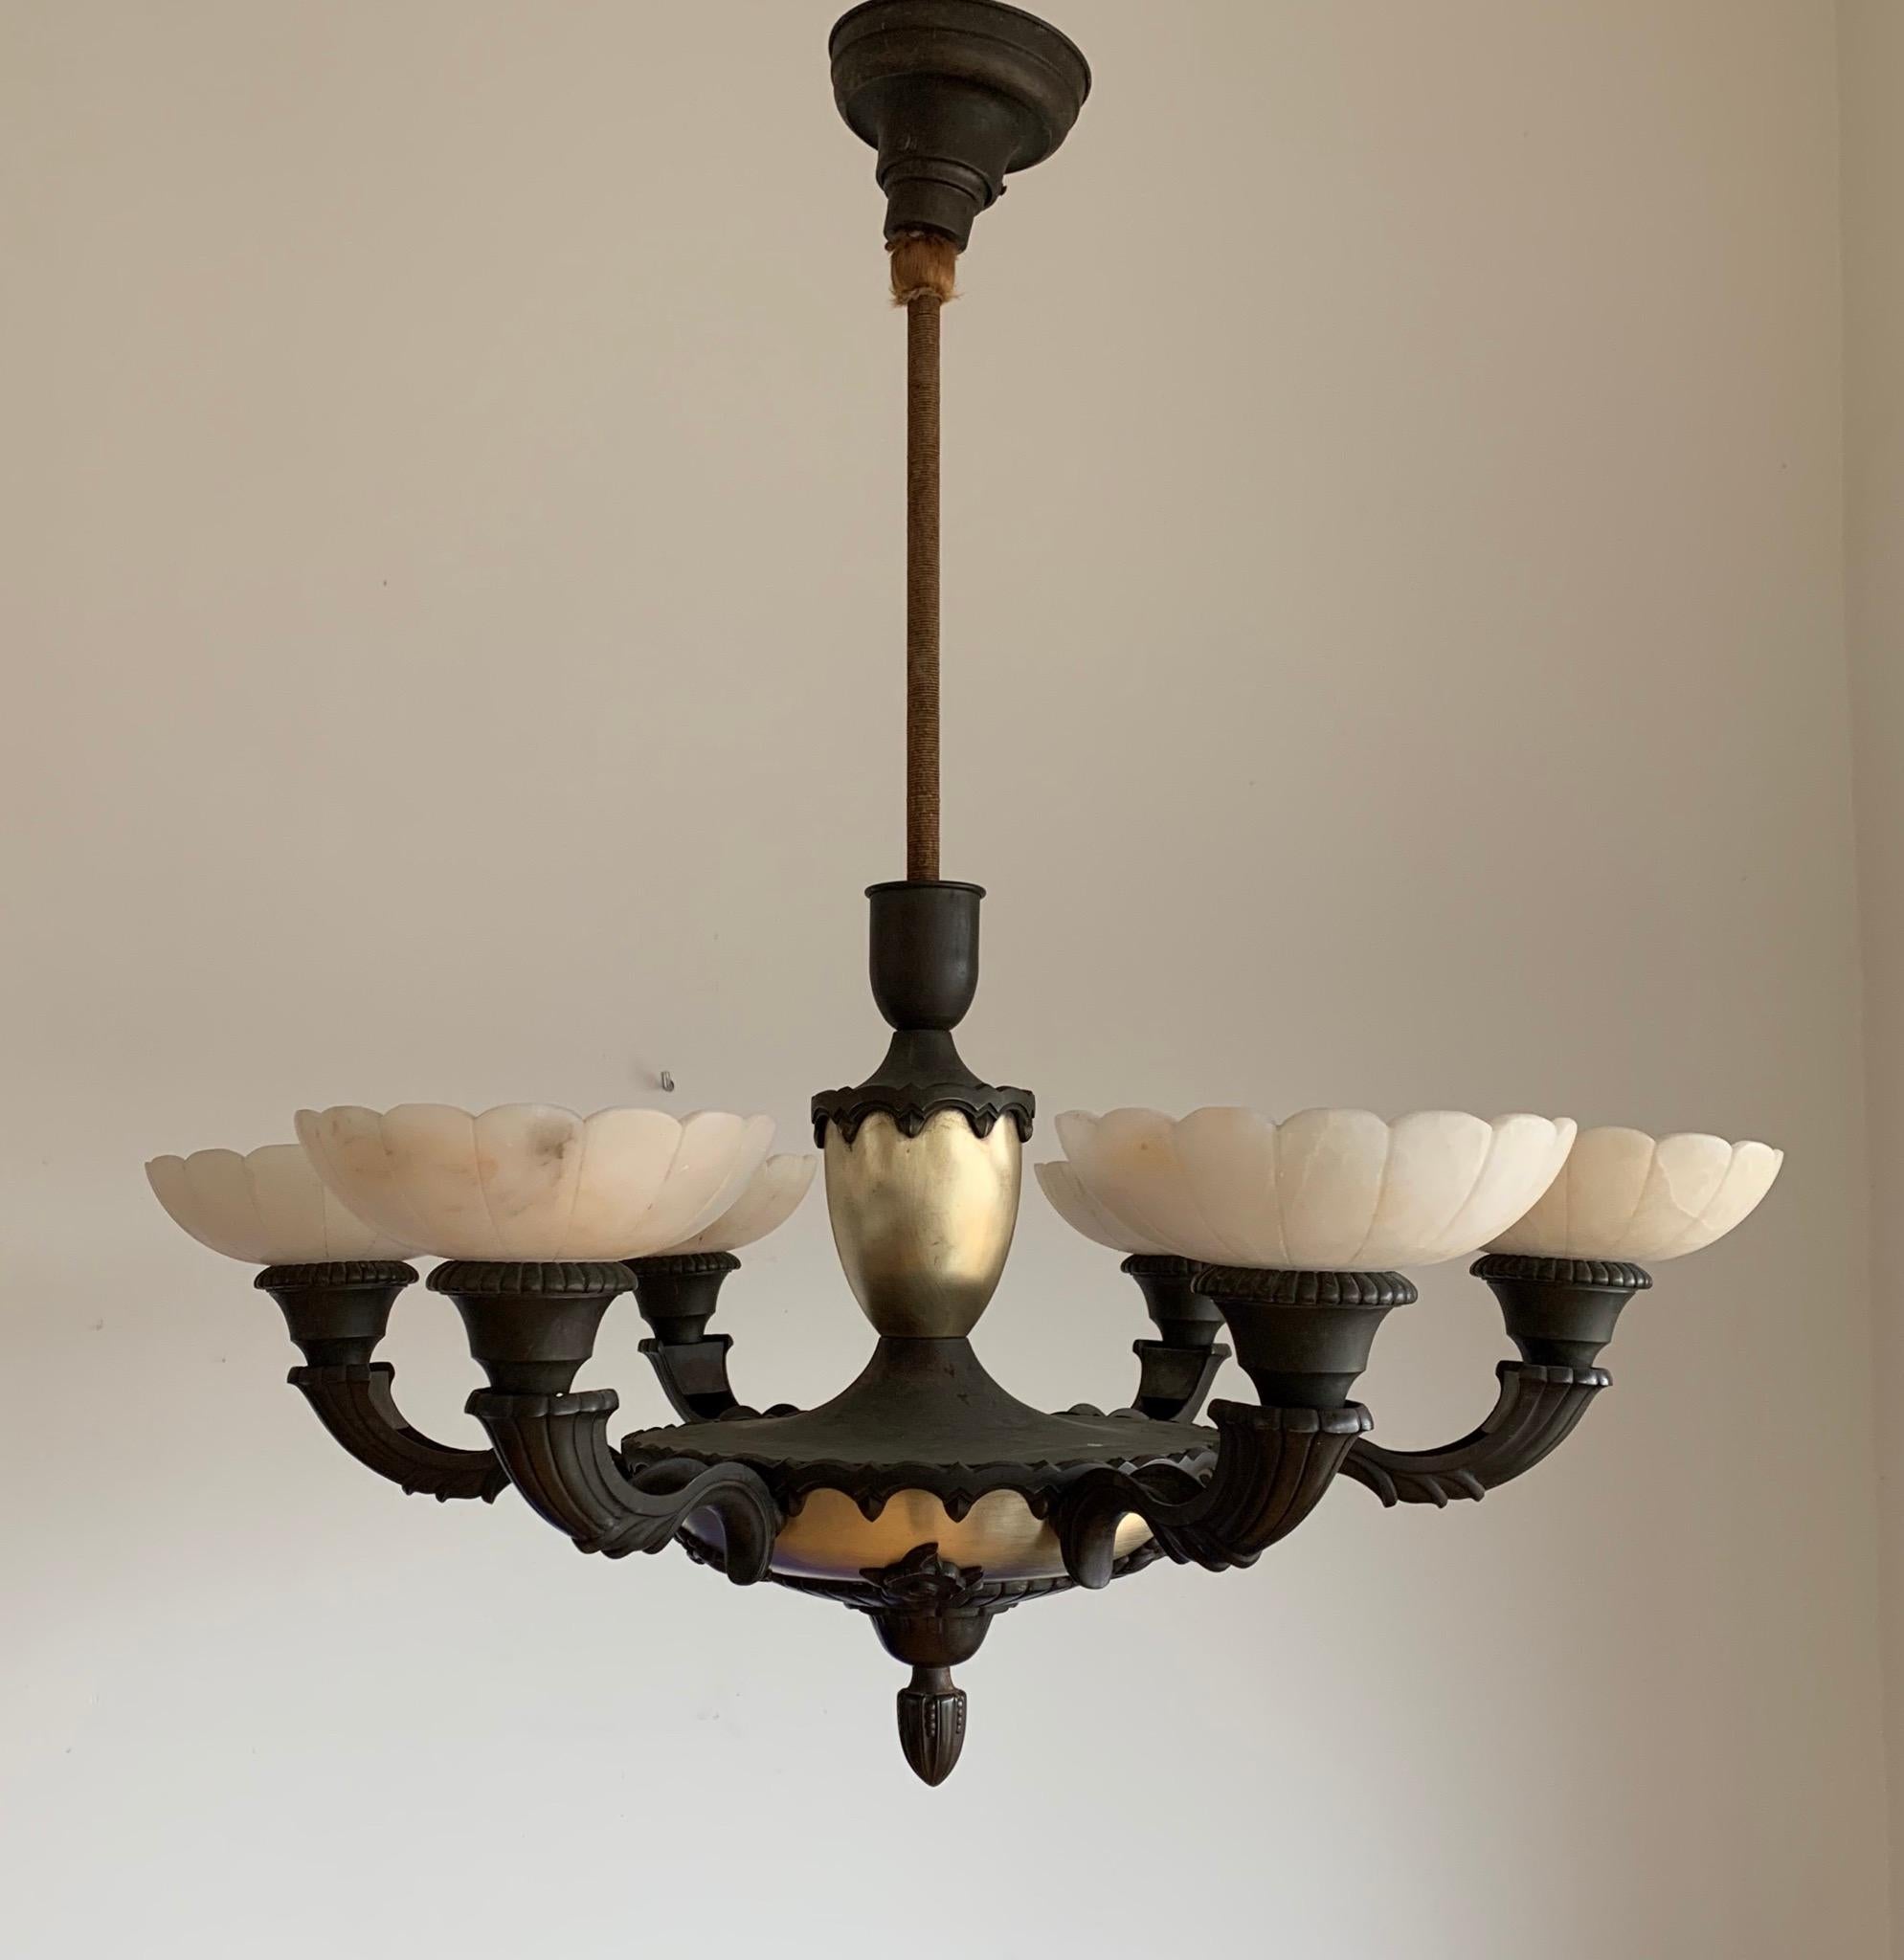 Stylish 1920s Art Deco White Alabaster and Bronze Arms Chandelier Light Fixture 7